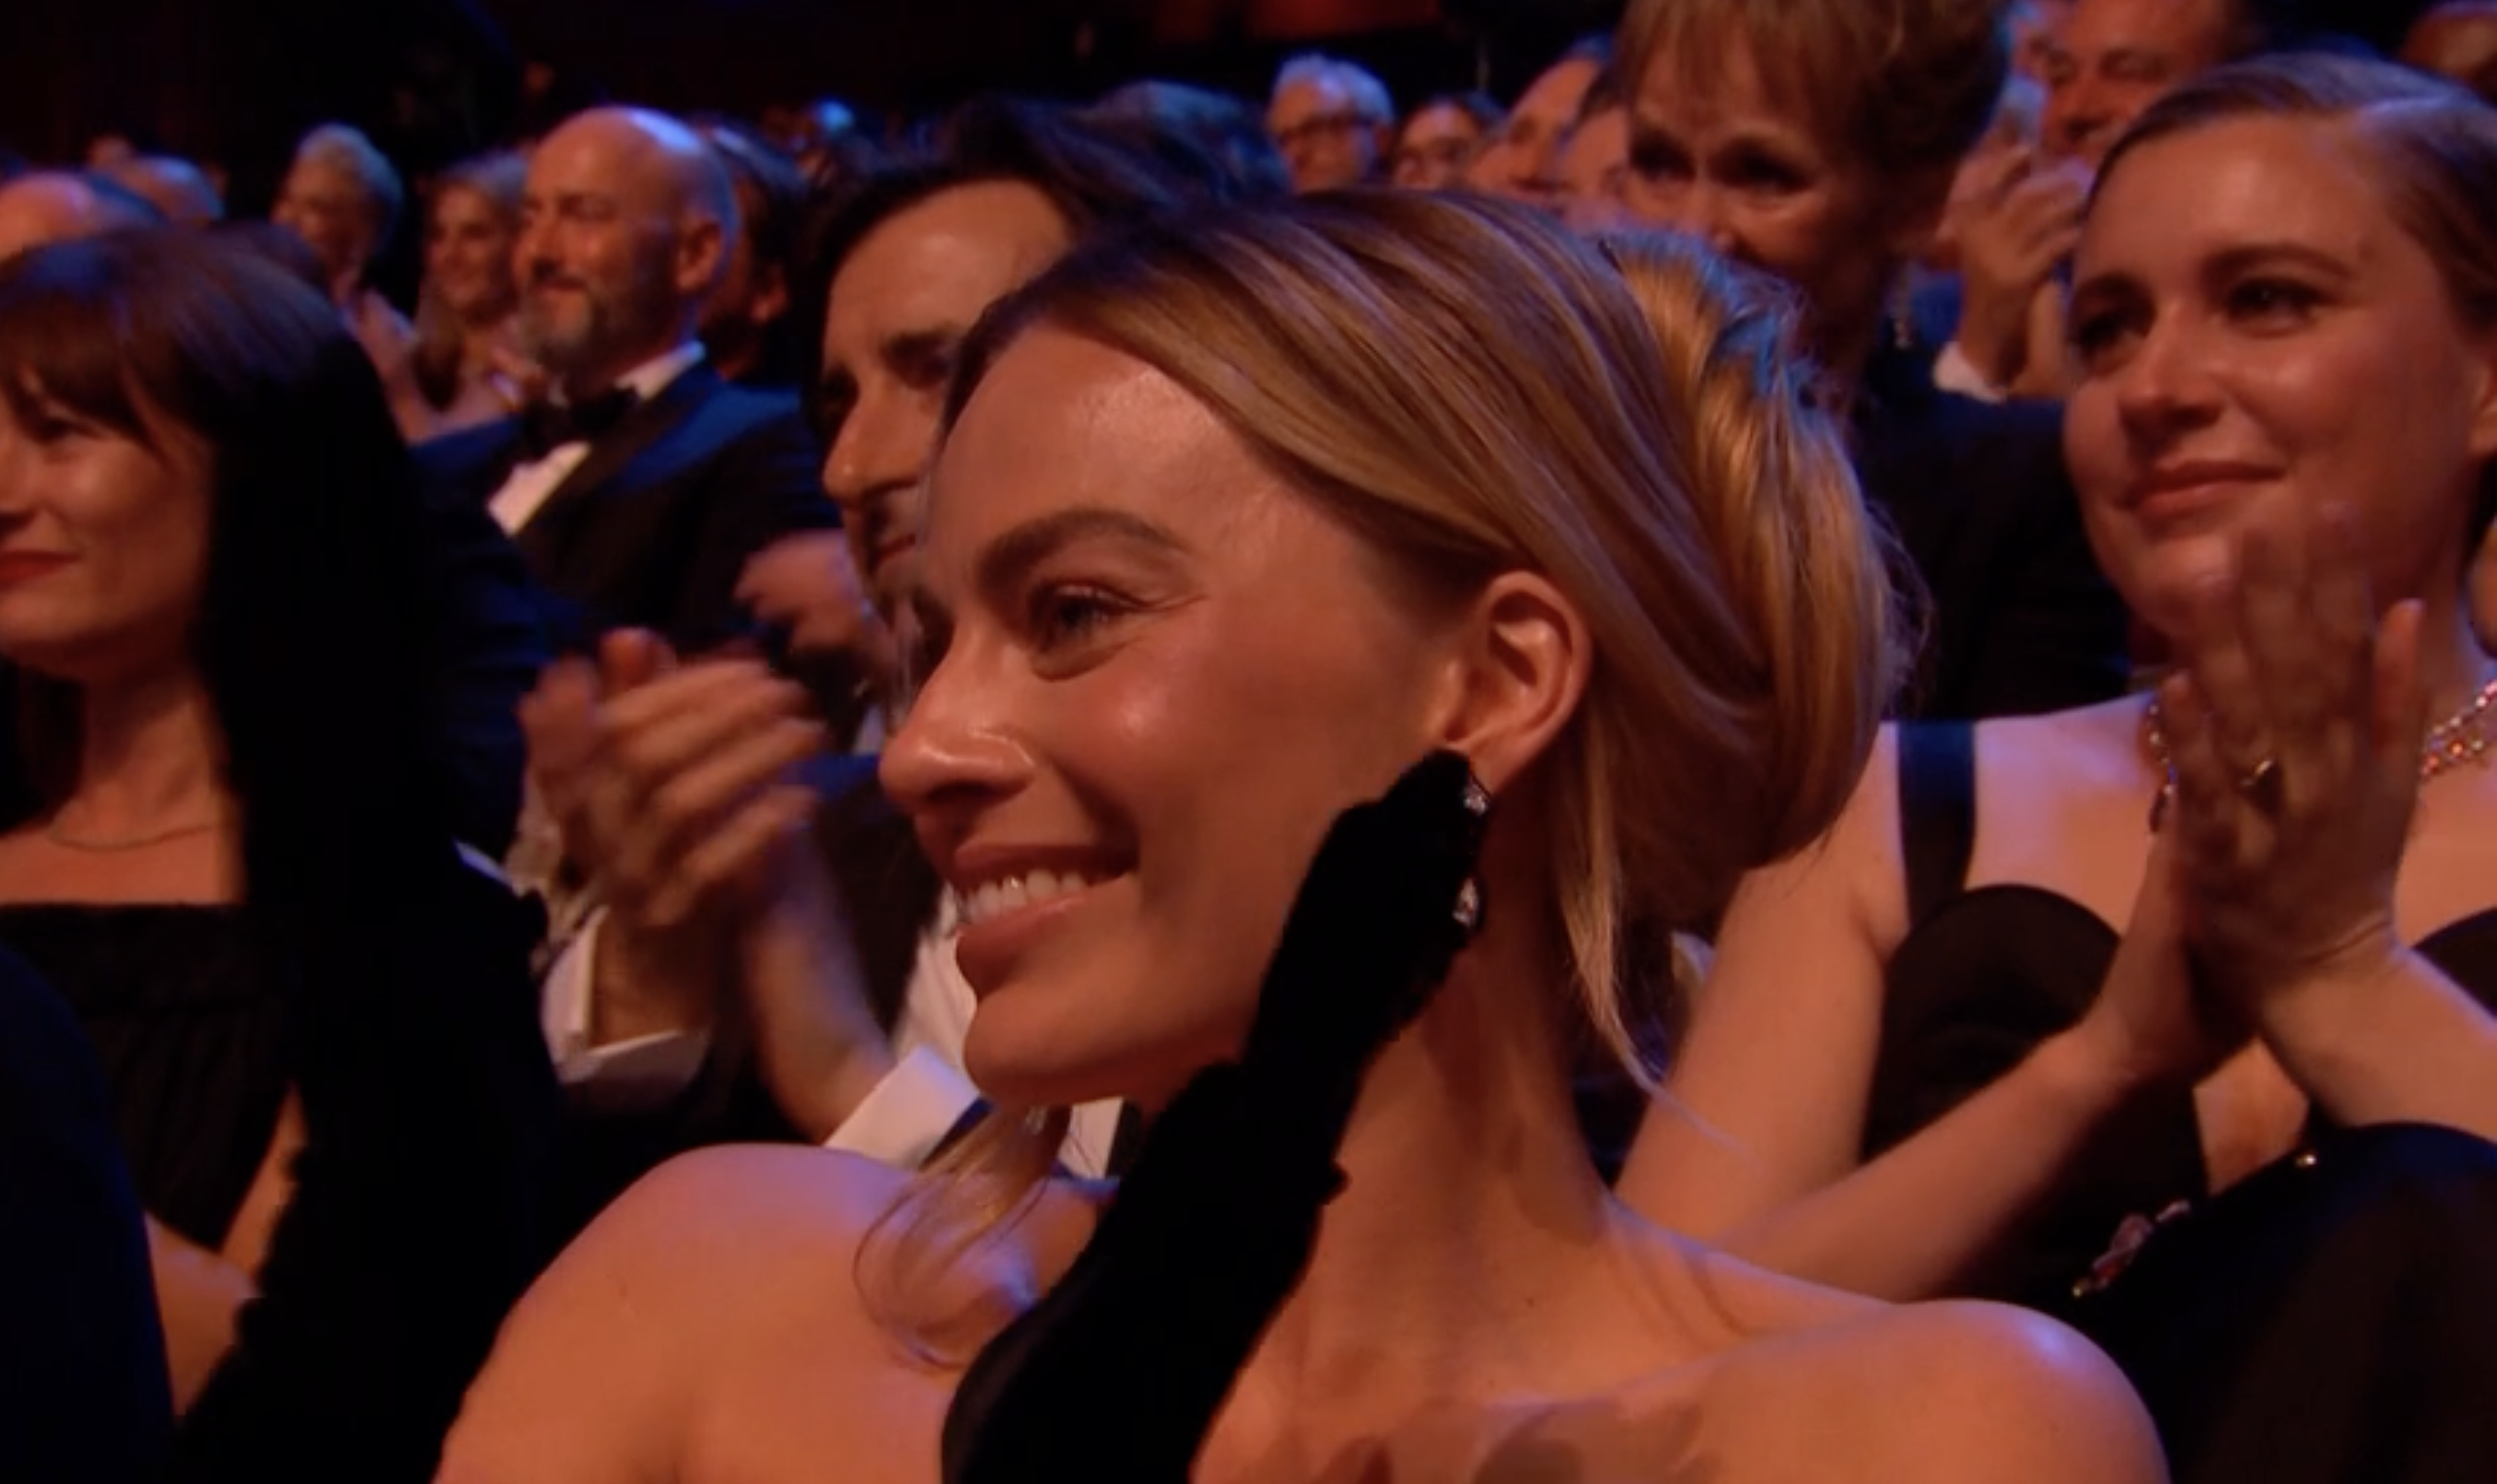 Margot beamed with happiness for her pal Emma Stone